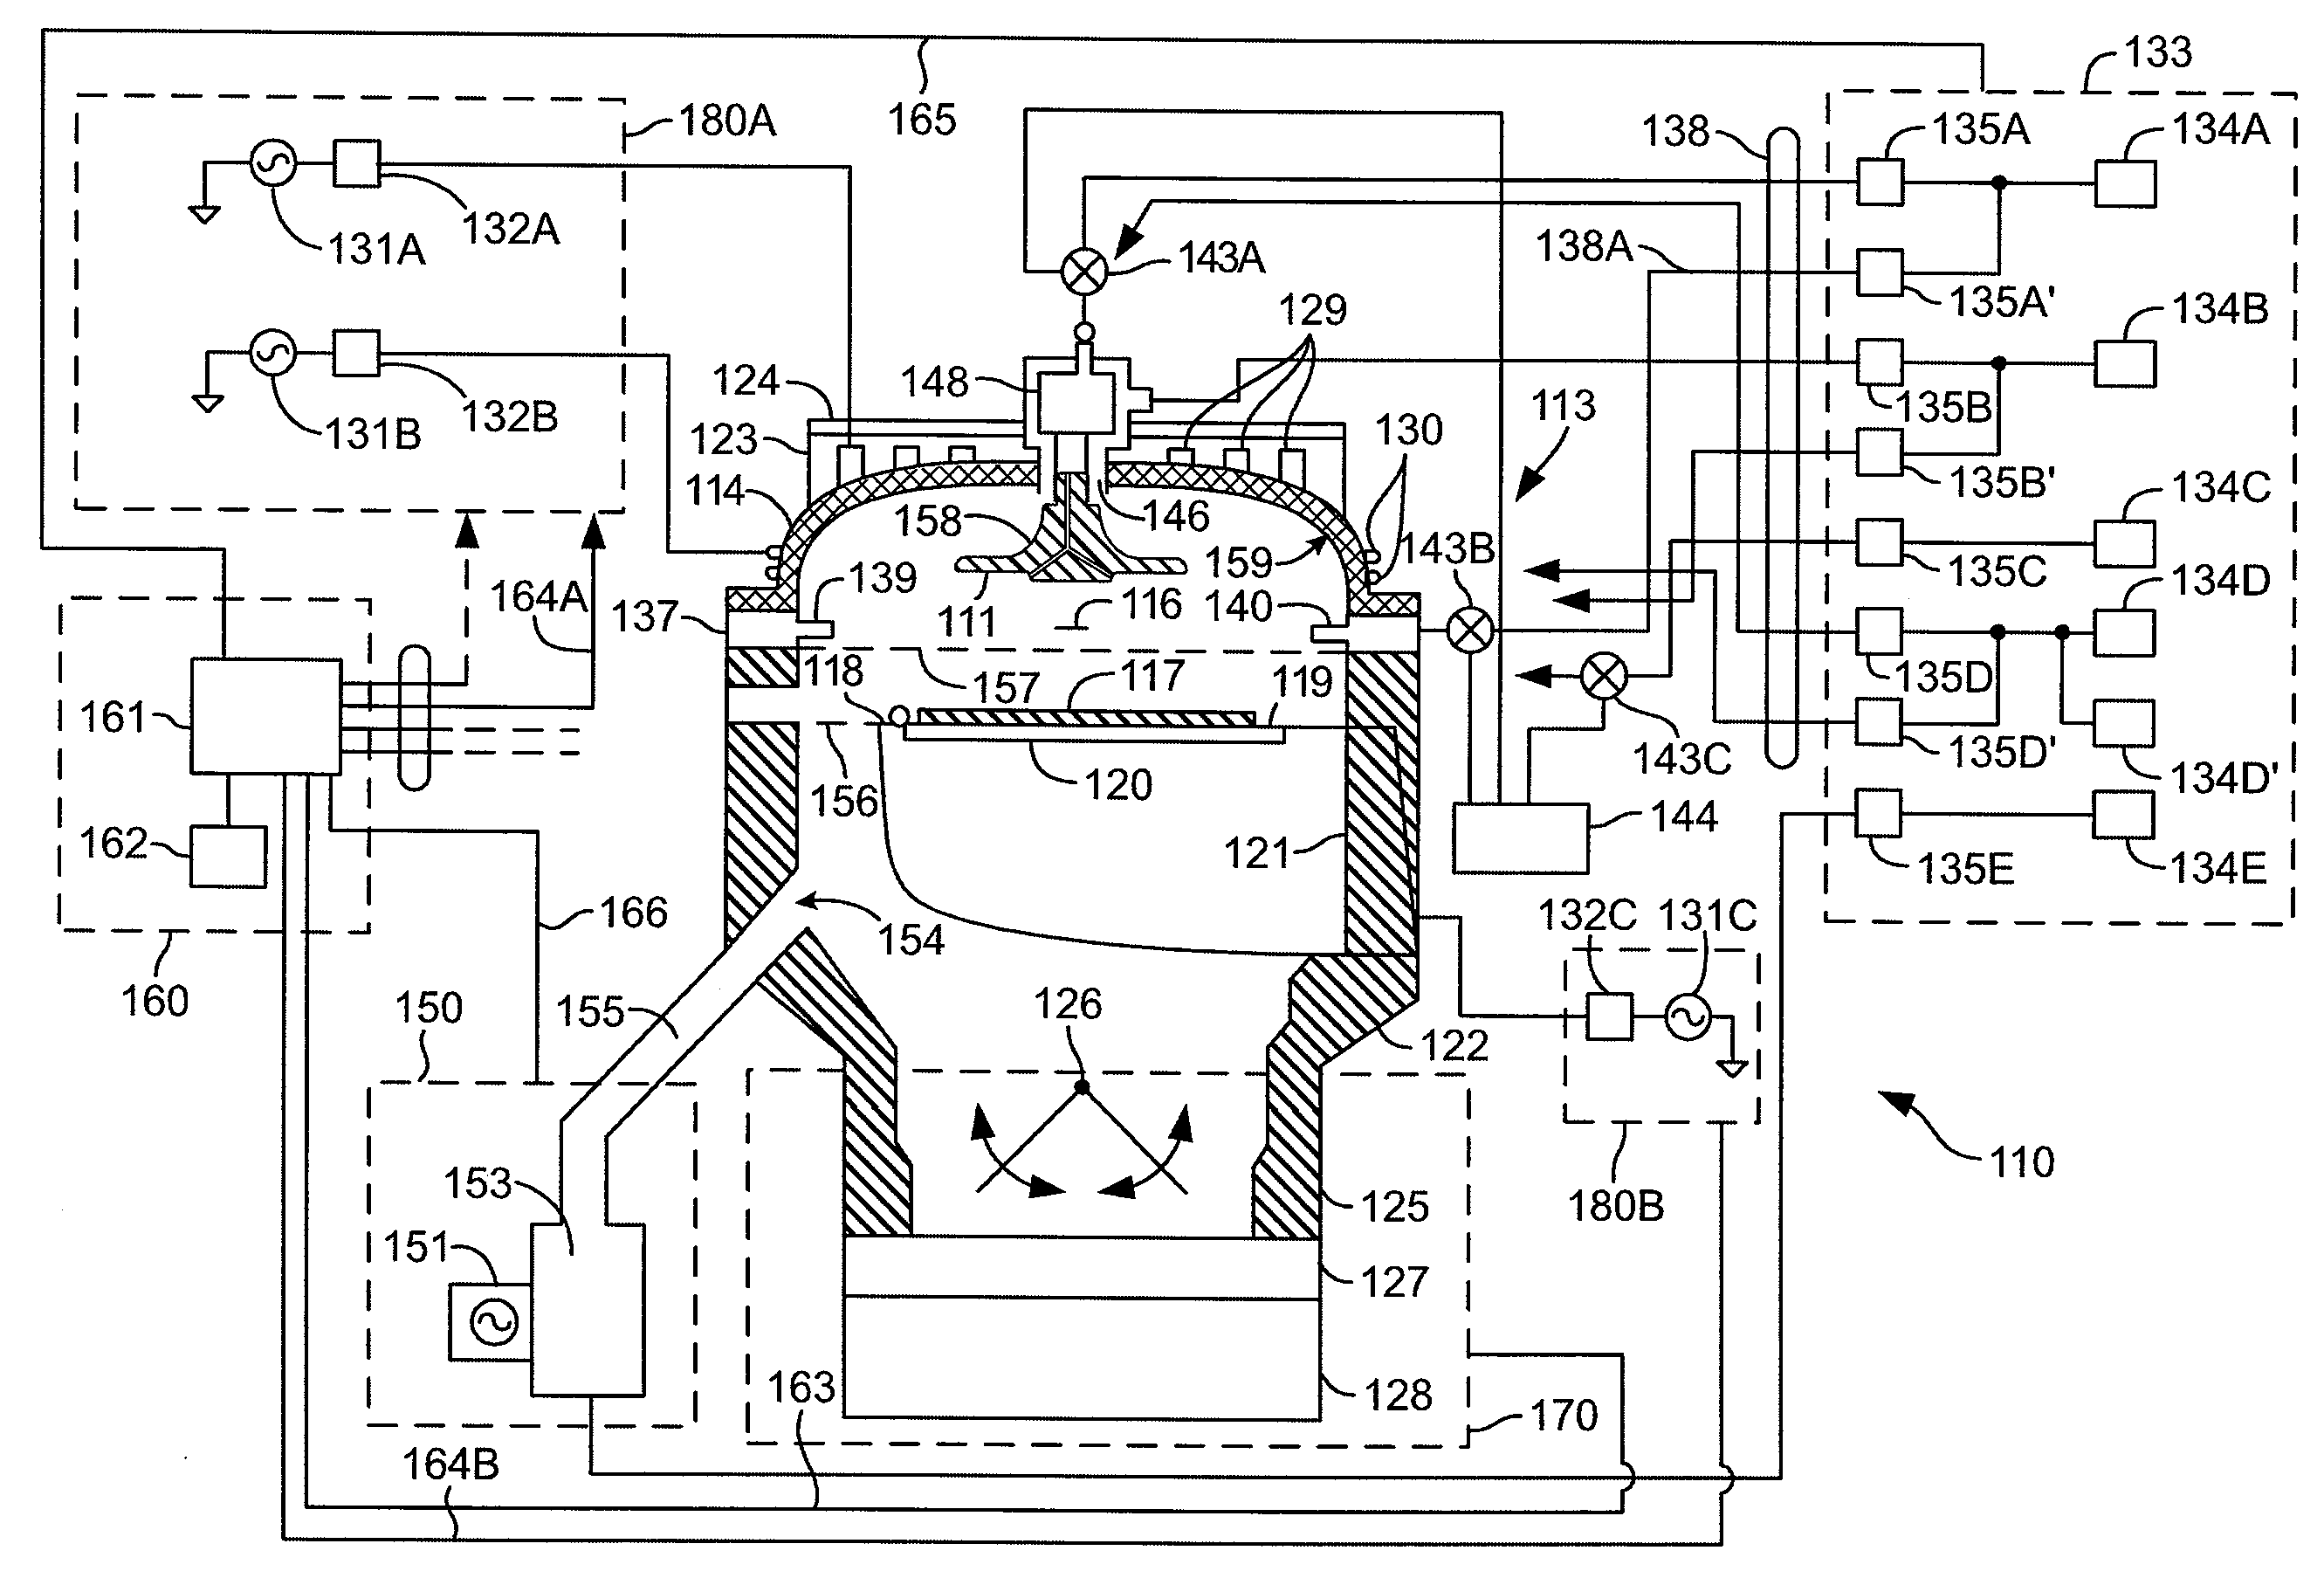 Internal balanced coil for inductively coupled high density plasma processing chamber